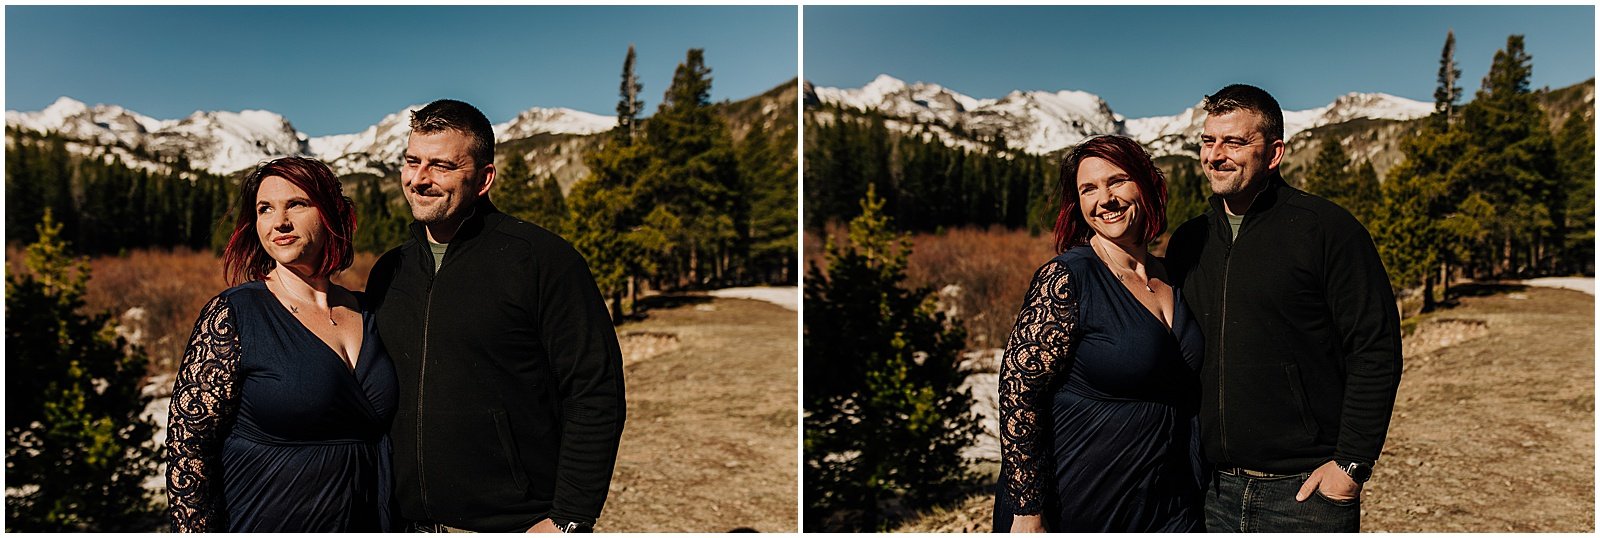 Mountain-Engagement-Photos-AndreaWagnerPhotography_0152.jpg